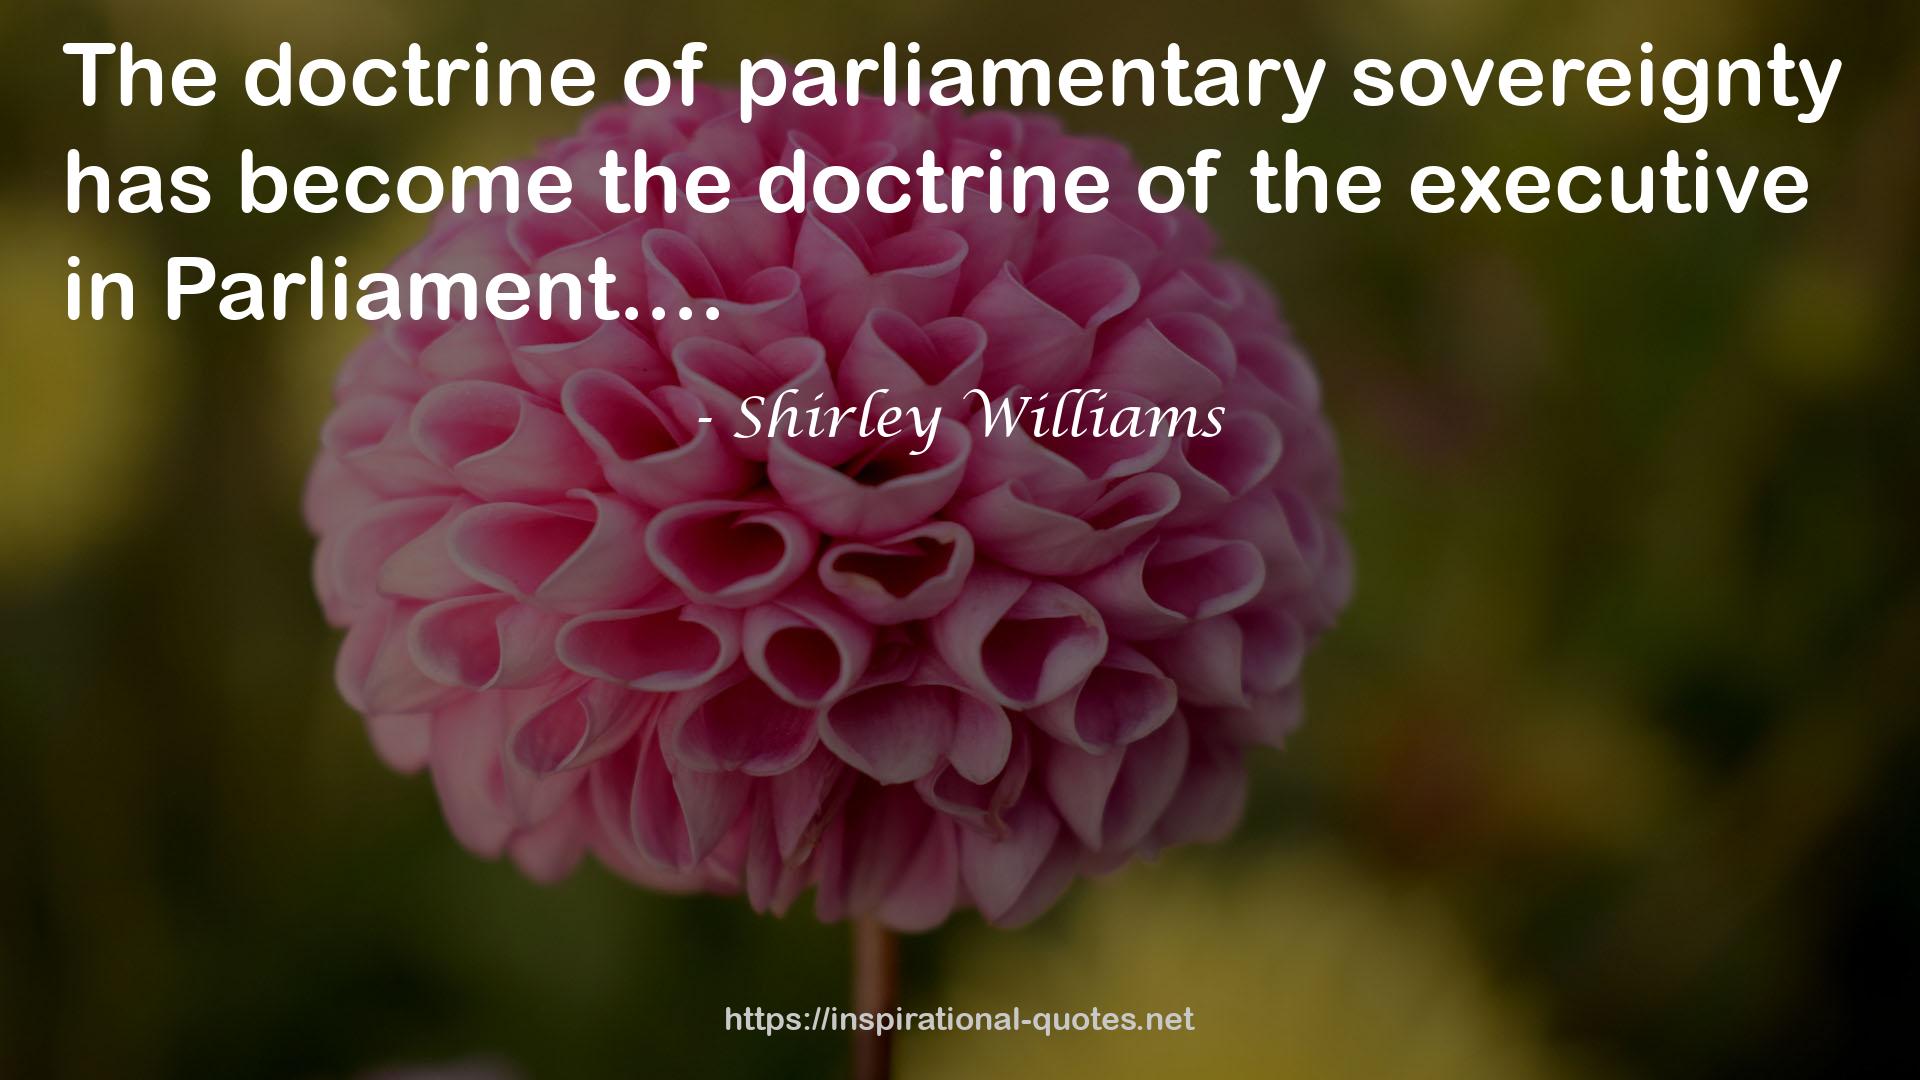 Shirley Williams QUOTES